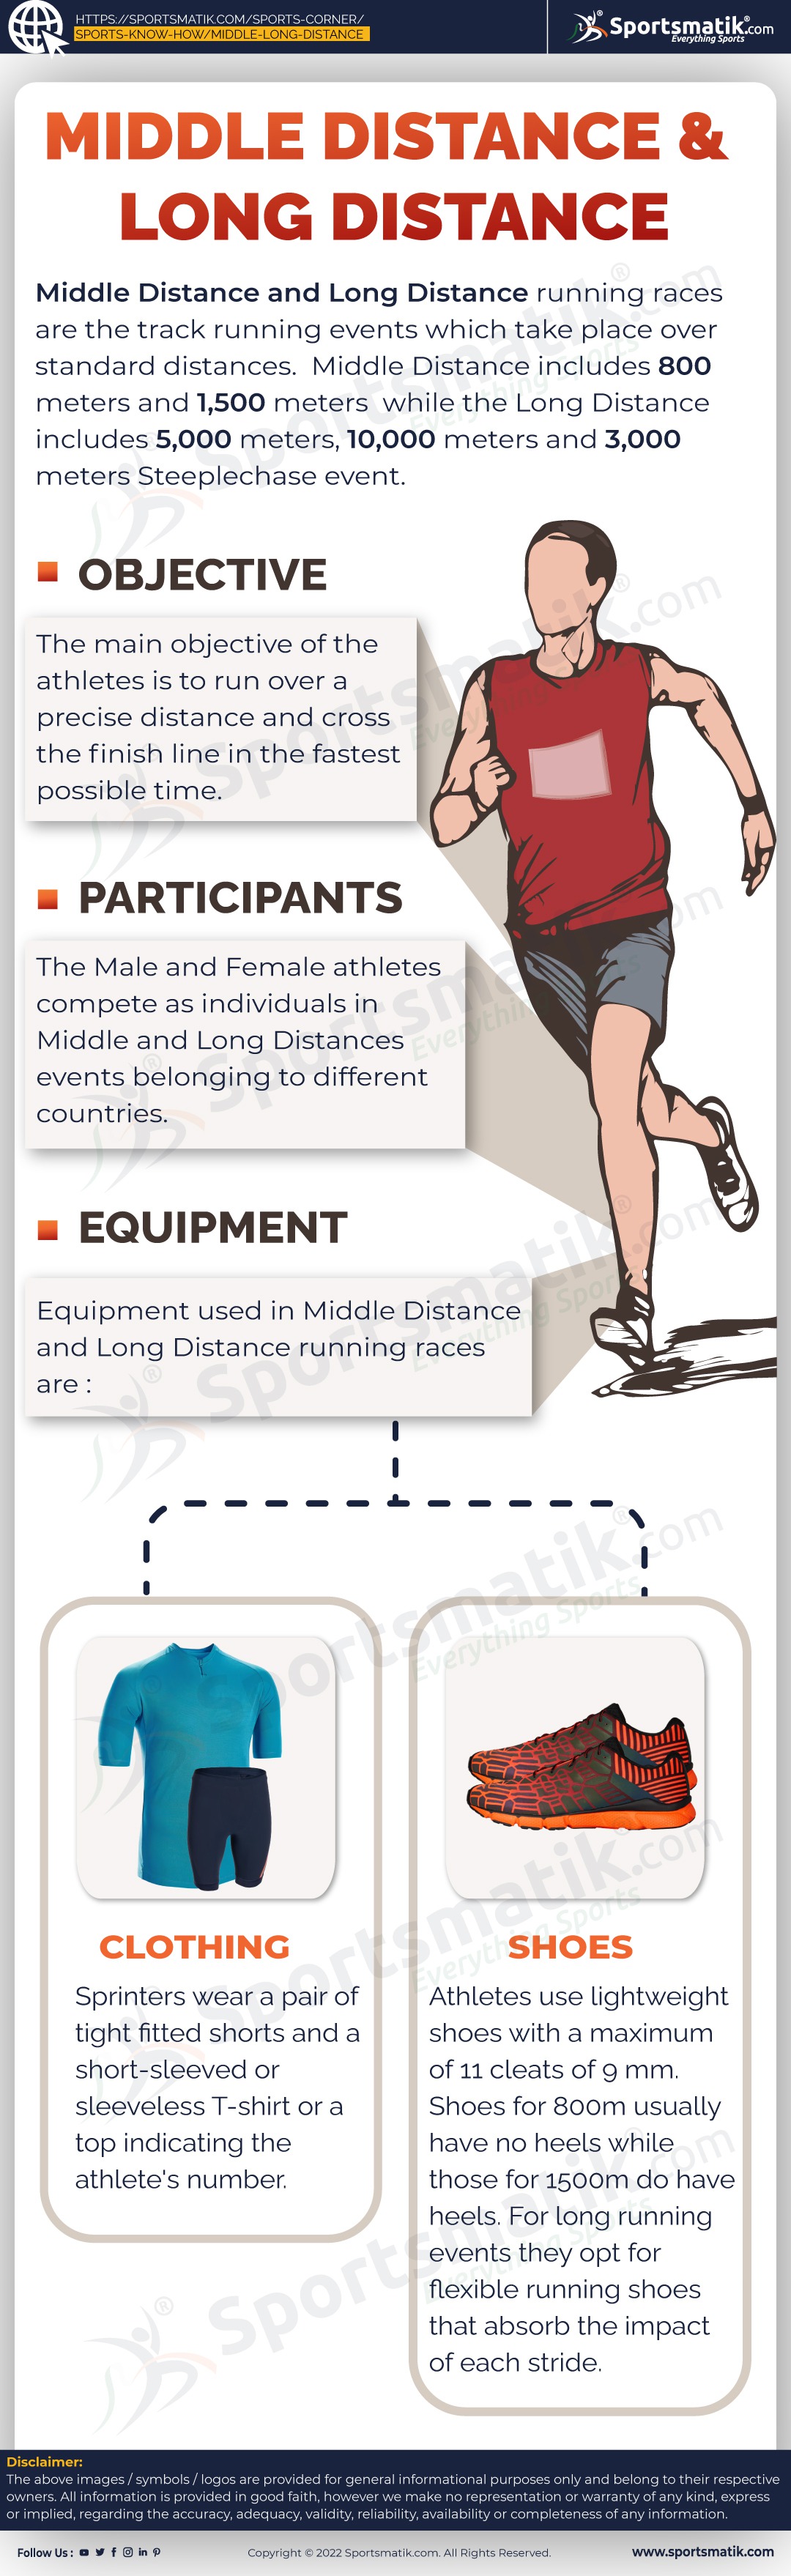 Middle Distance and Long Distance Running